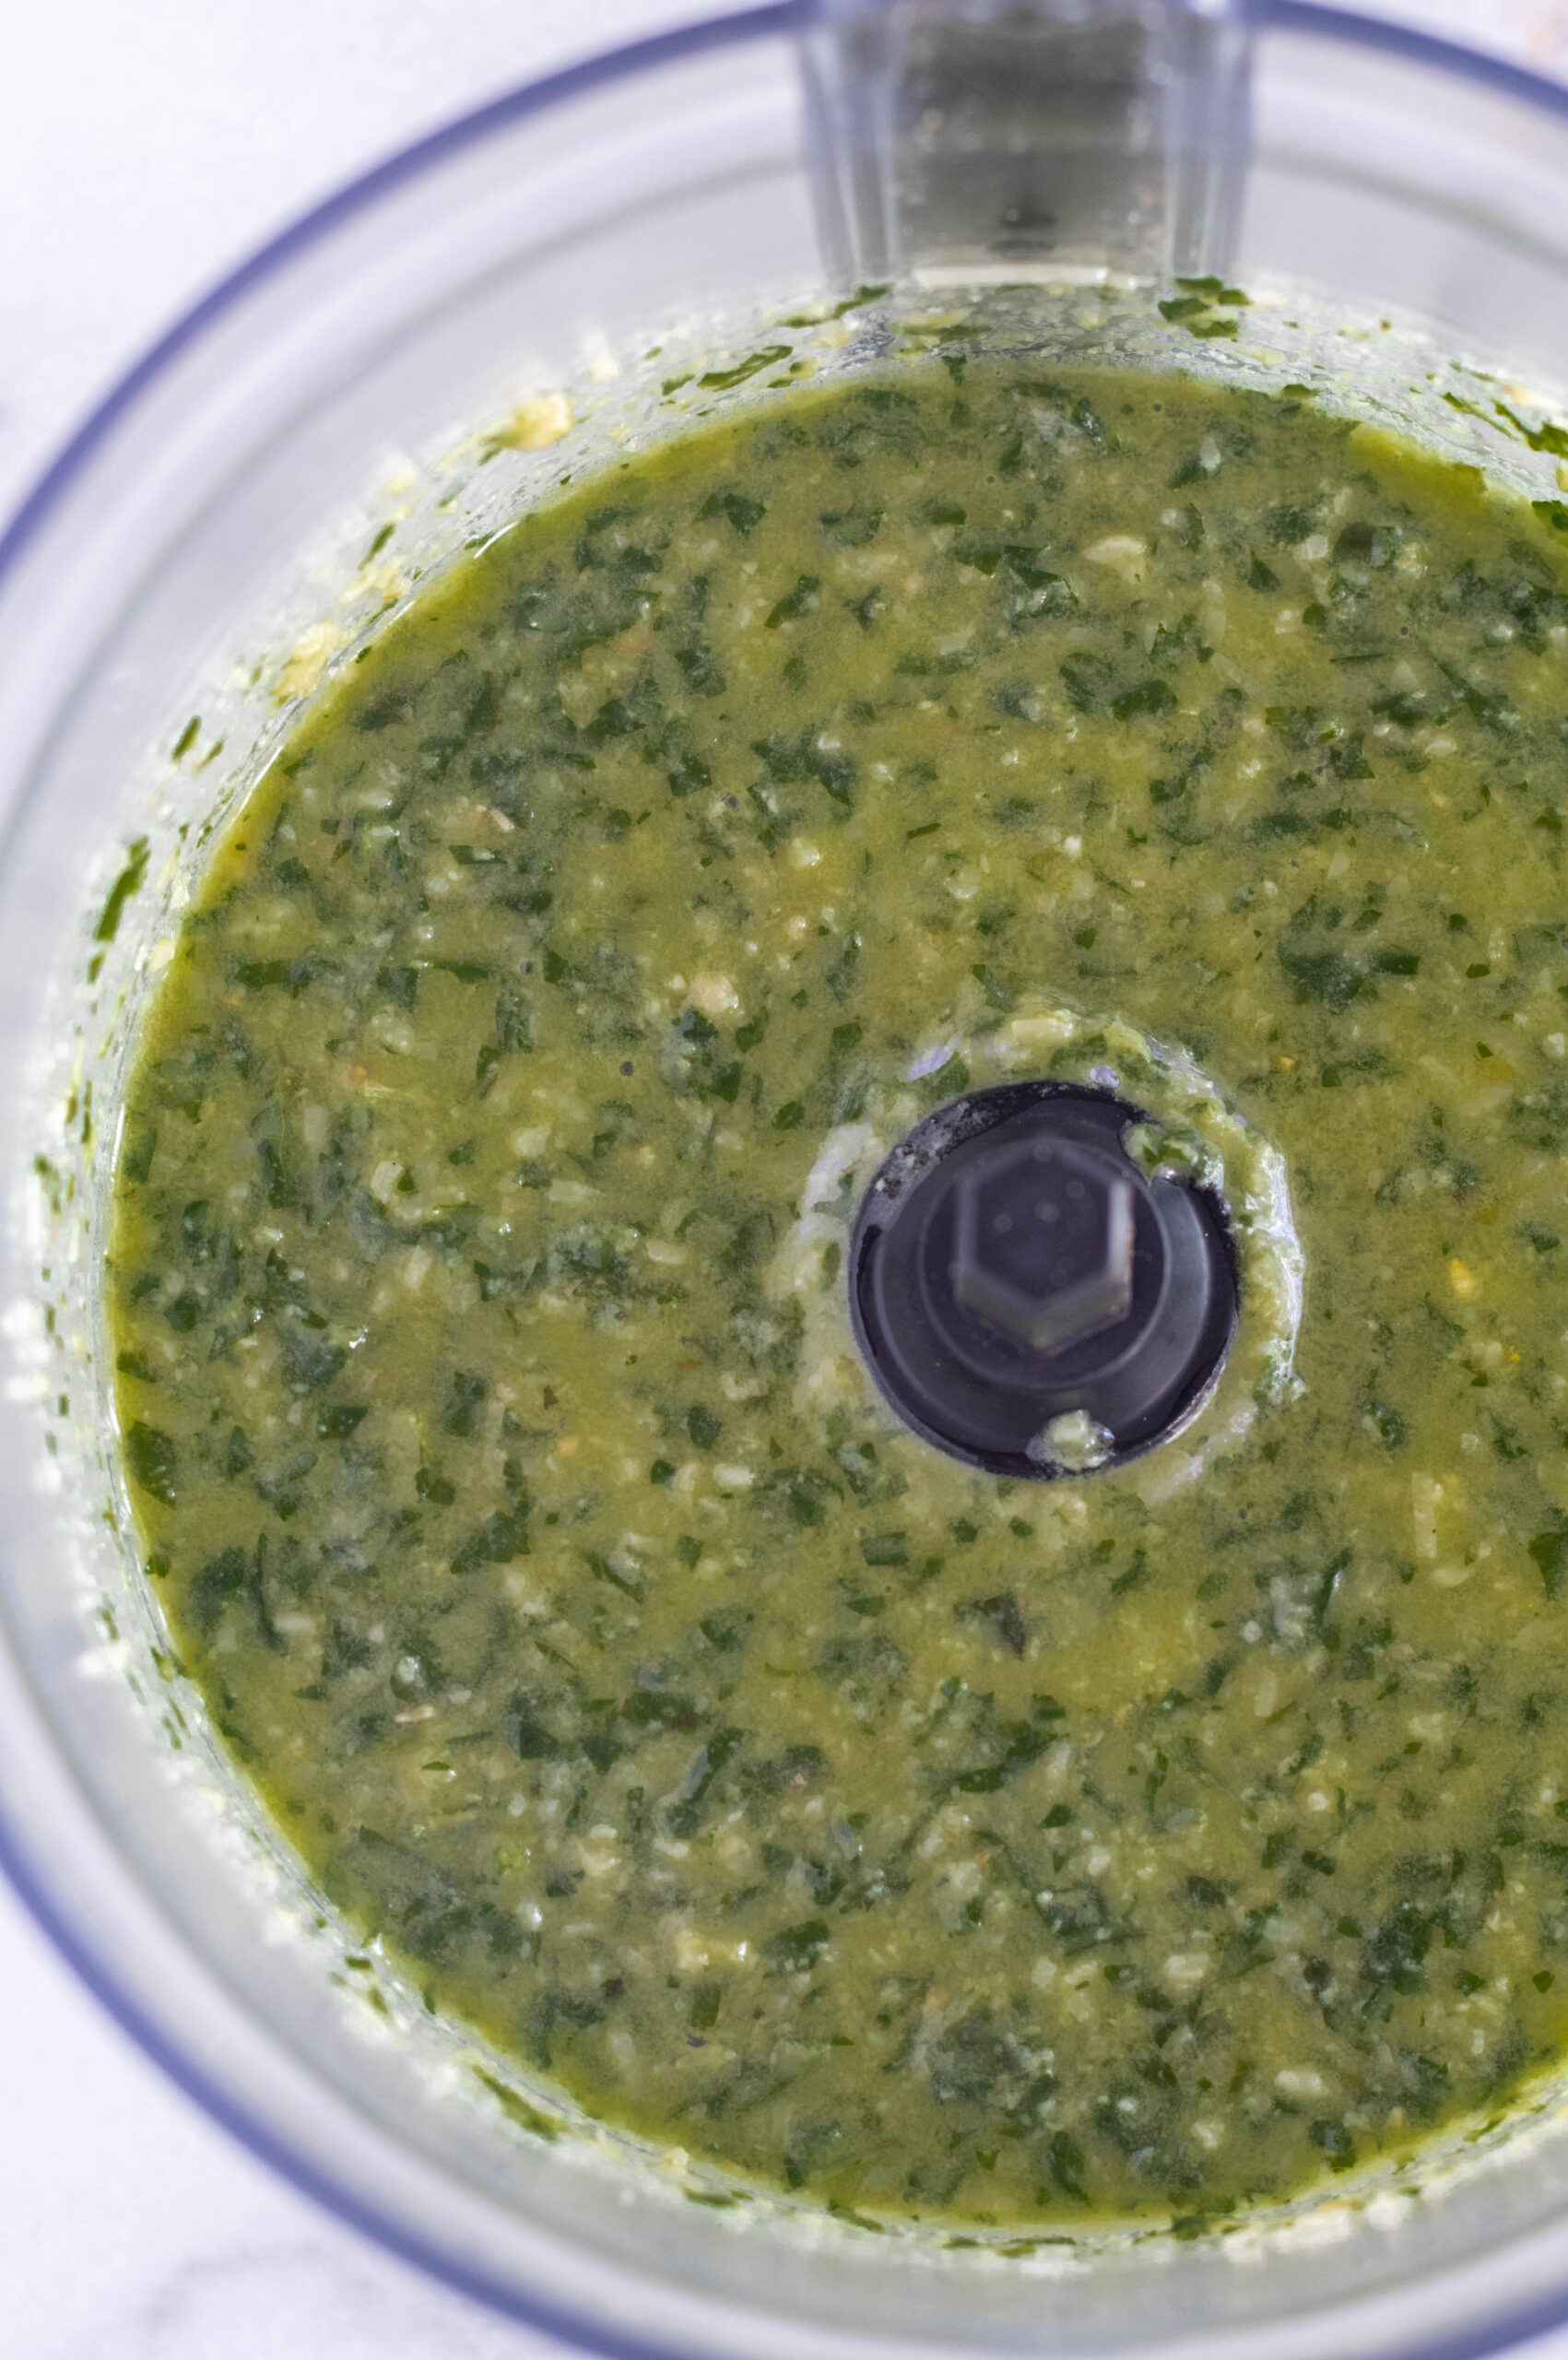 Blended pesto in the bowl of a food processor.